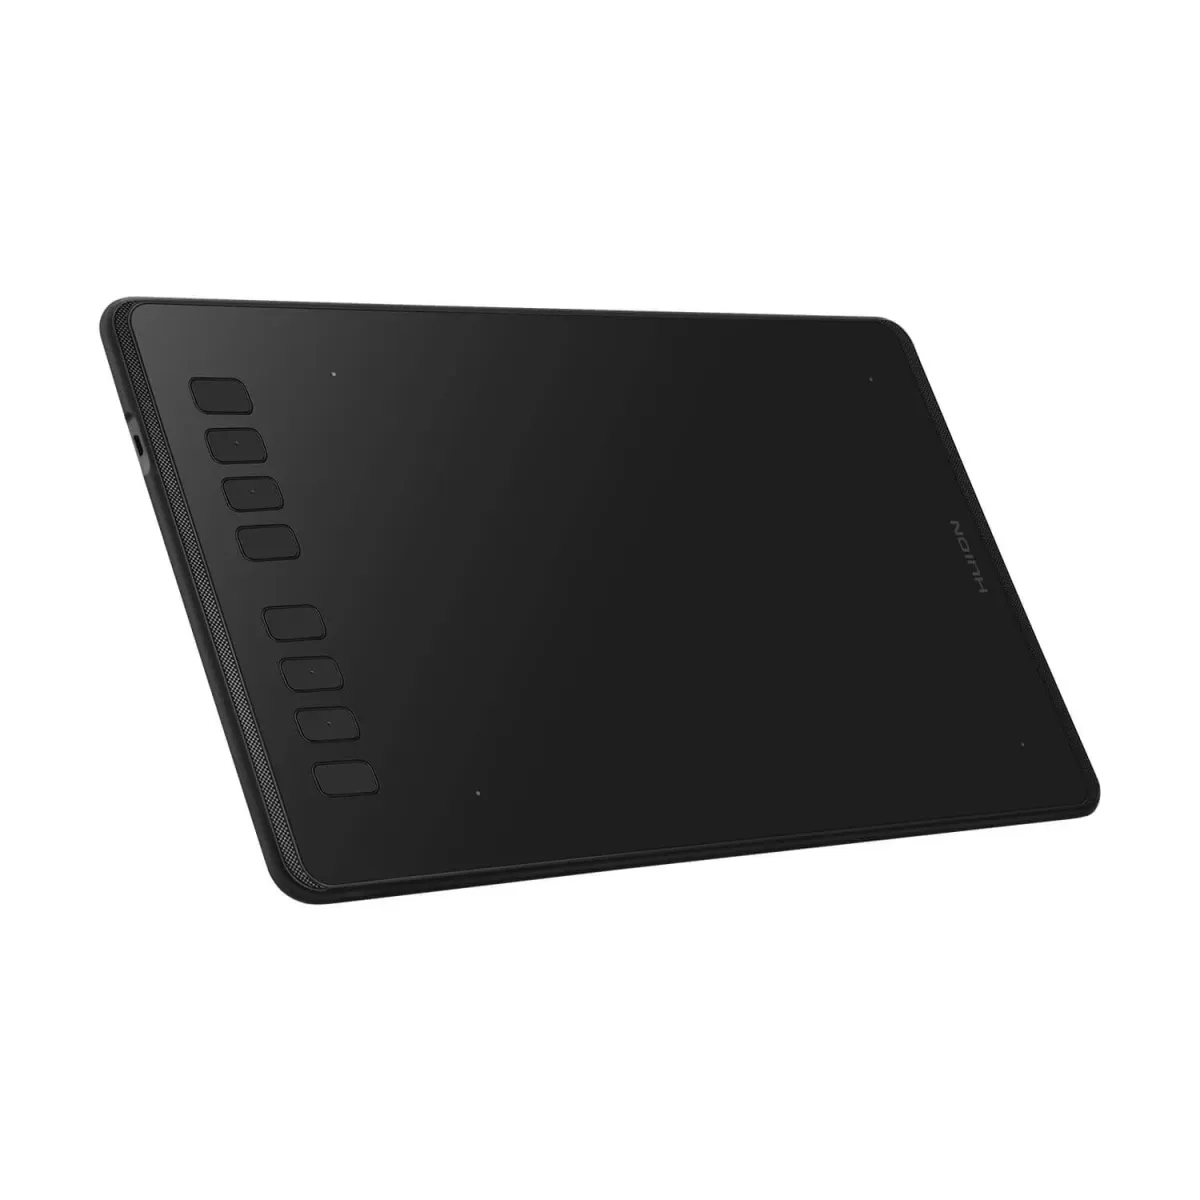 Graphic Tablets for Architecture Students